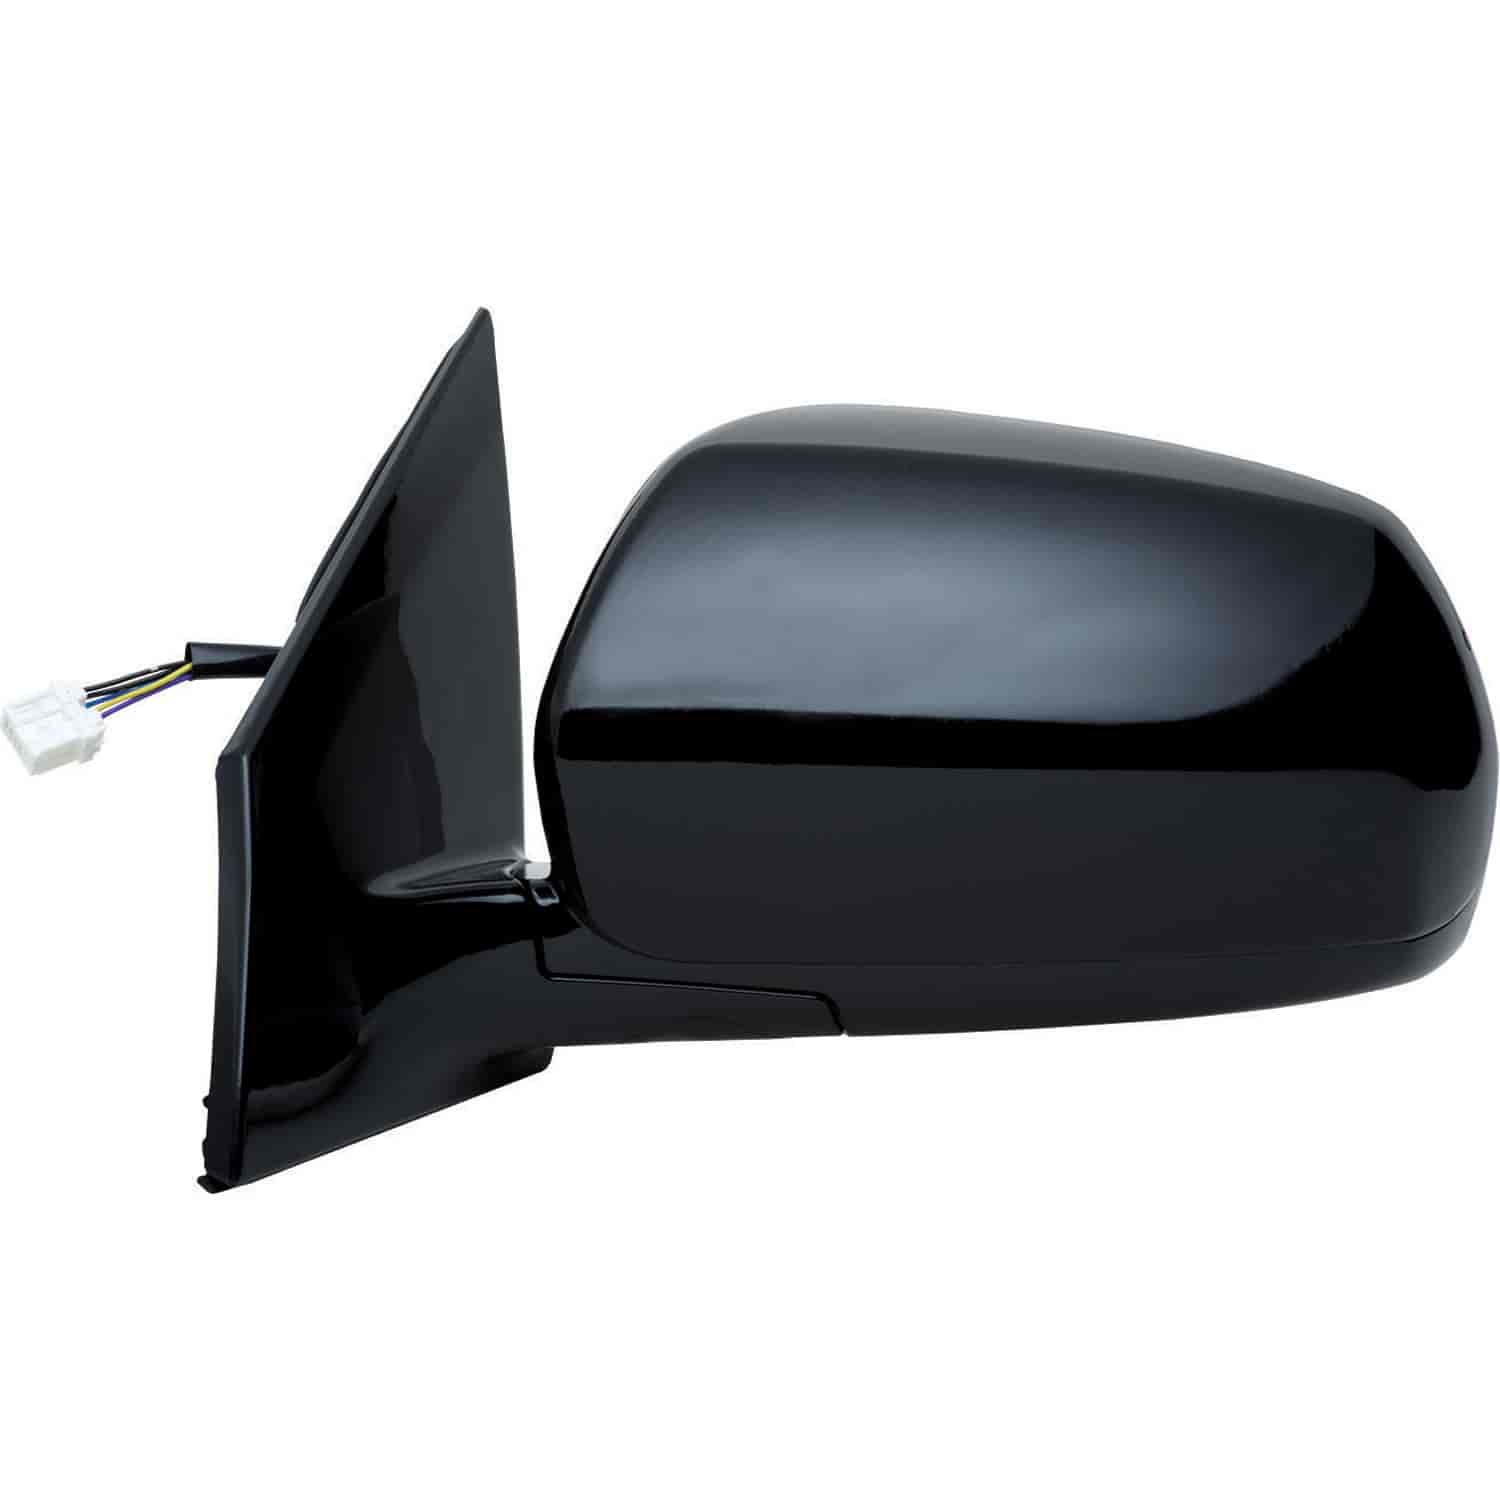 OEM Style Replacement mirror for 03-04 Nissan Murano w/memory driver side mirror tested to fit and f